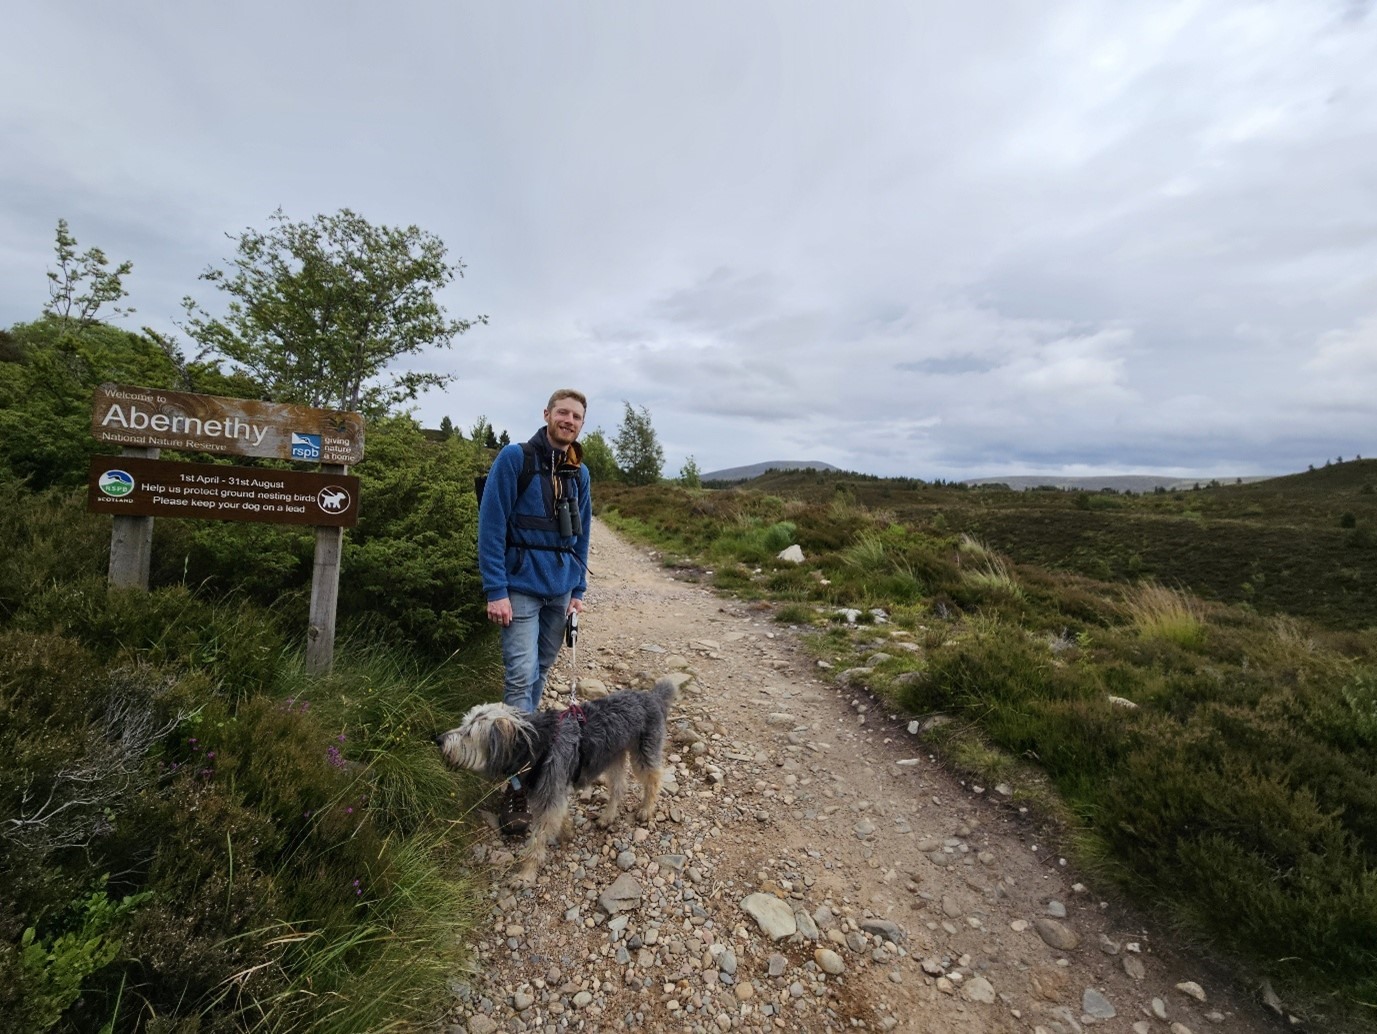 RSPB Scotland's Ben Oliver Jones is standing on a track with his dog. They are by a sign which reads, "Welcome to Abernethy National Nature Reserve".